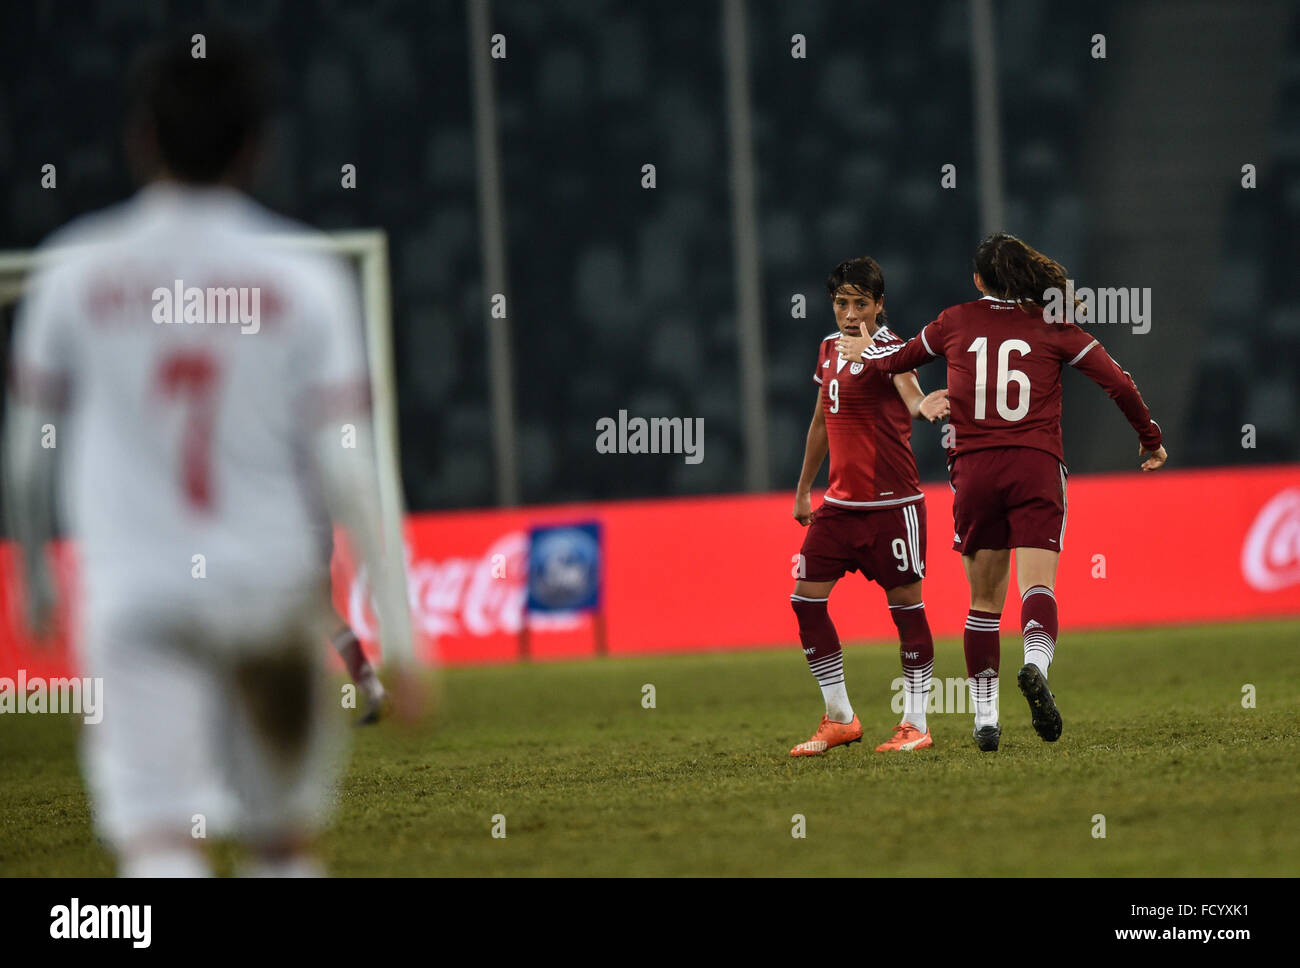 Shenzhen, China's Guangdong Province. 26th Jan, 2016. Desiree Monsivais (R) and Maribel Dominguez of Mexico celebrate for goal during the match against Vietnam at the 2016 Shenzhen Women's Football International Tournament held in Shenzhen, south China's Guangdong Province, on Jan. 26, 2016. Mexico won 1-0. © Mao Siqian/Xinhua/Alamy Live News Stock Photo